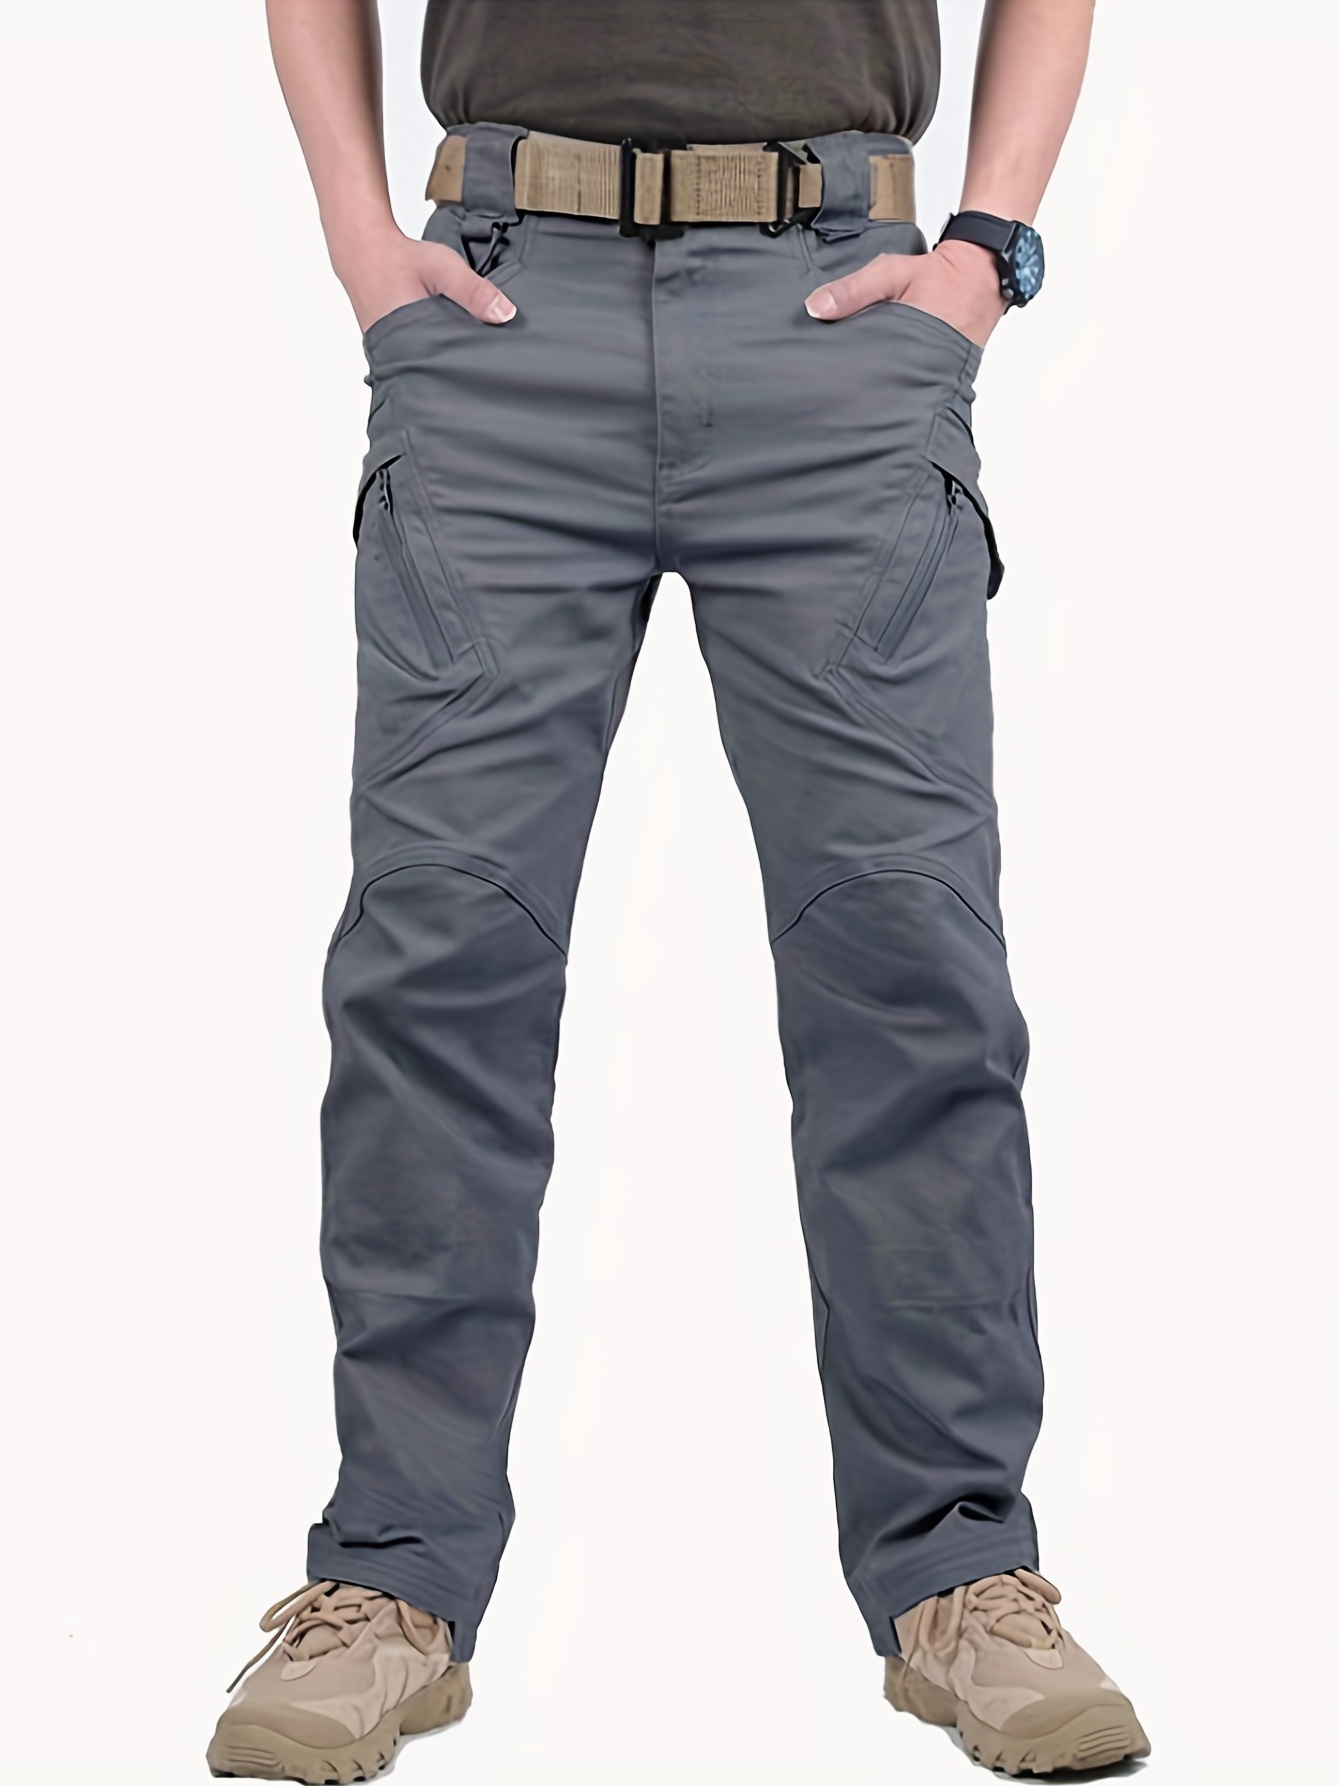 mens casual cargo pants with zipper pockets male joggers for spring and fall outdoor